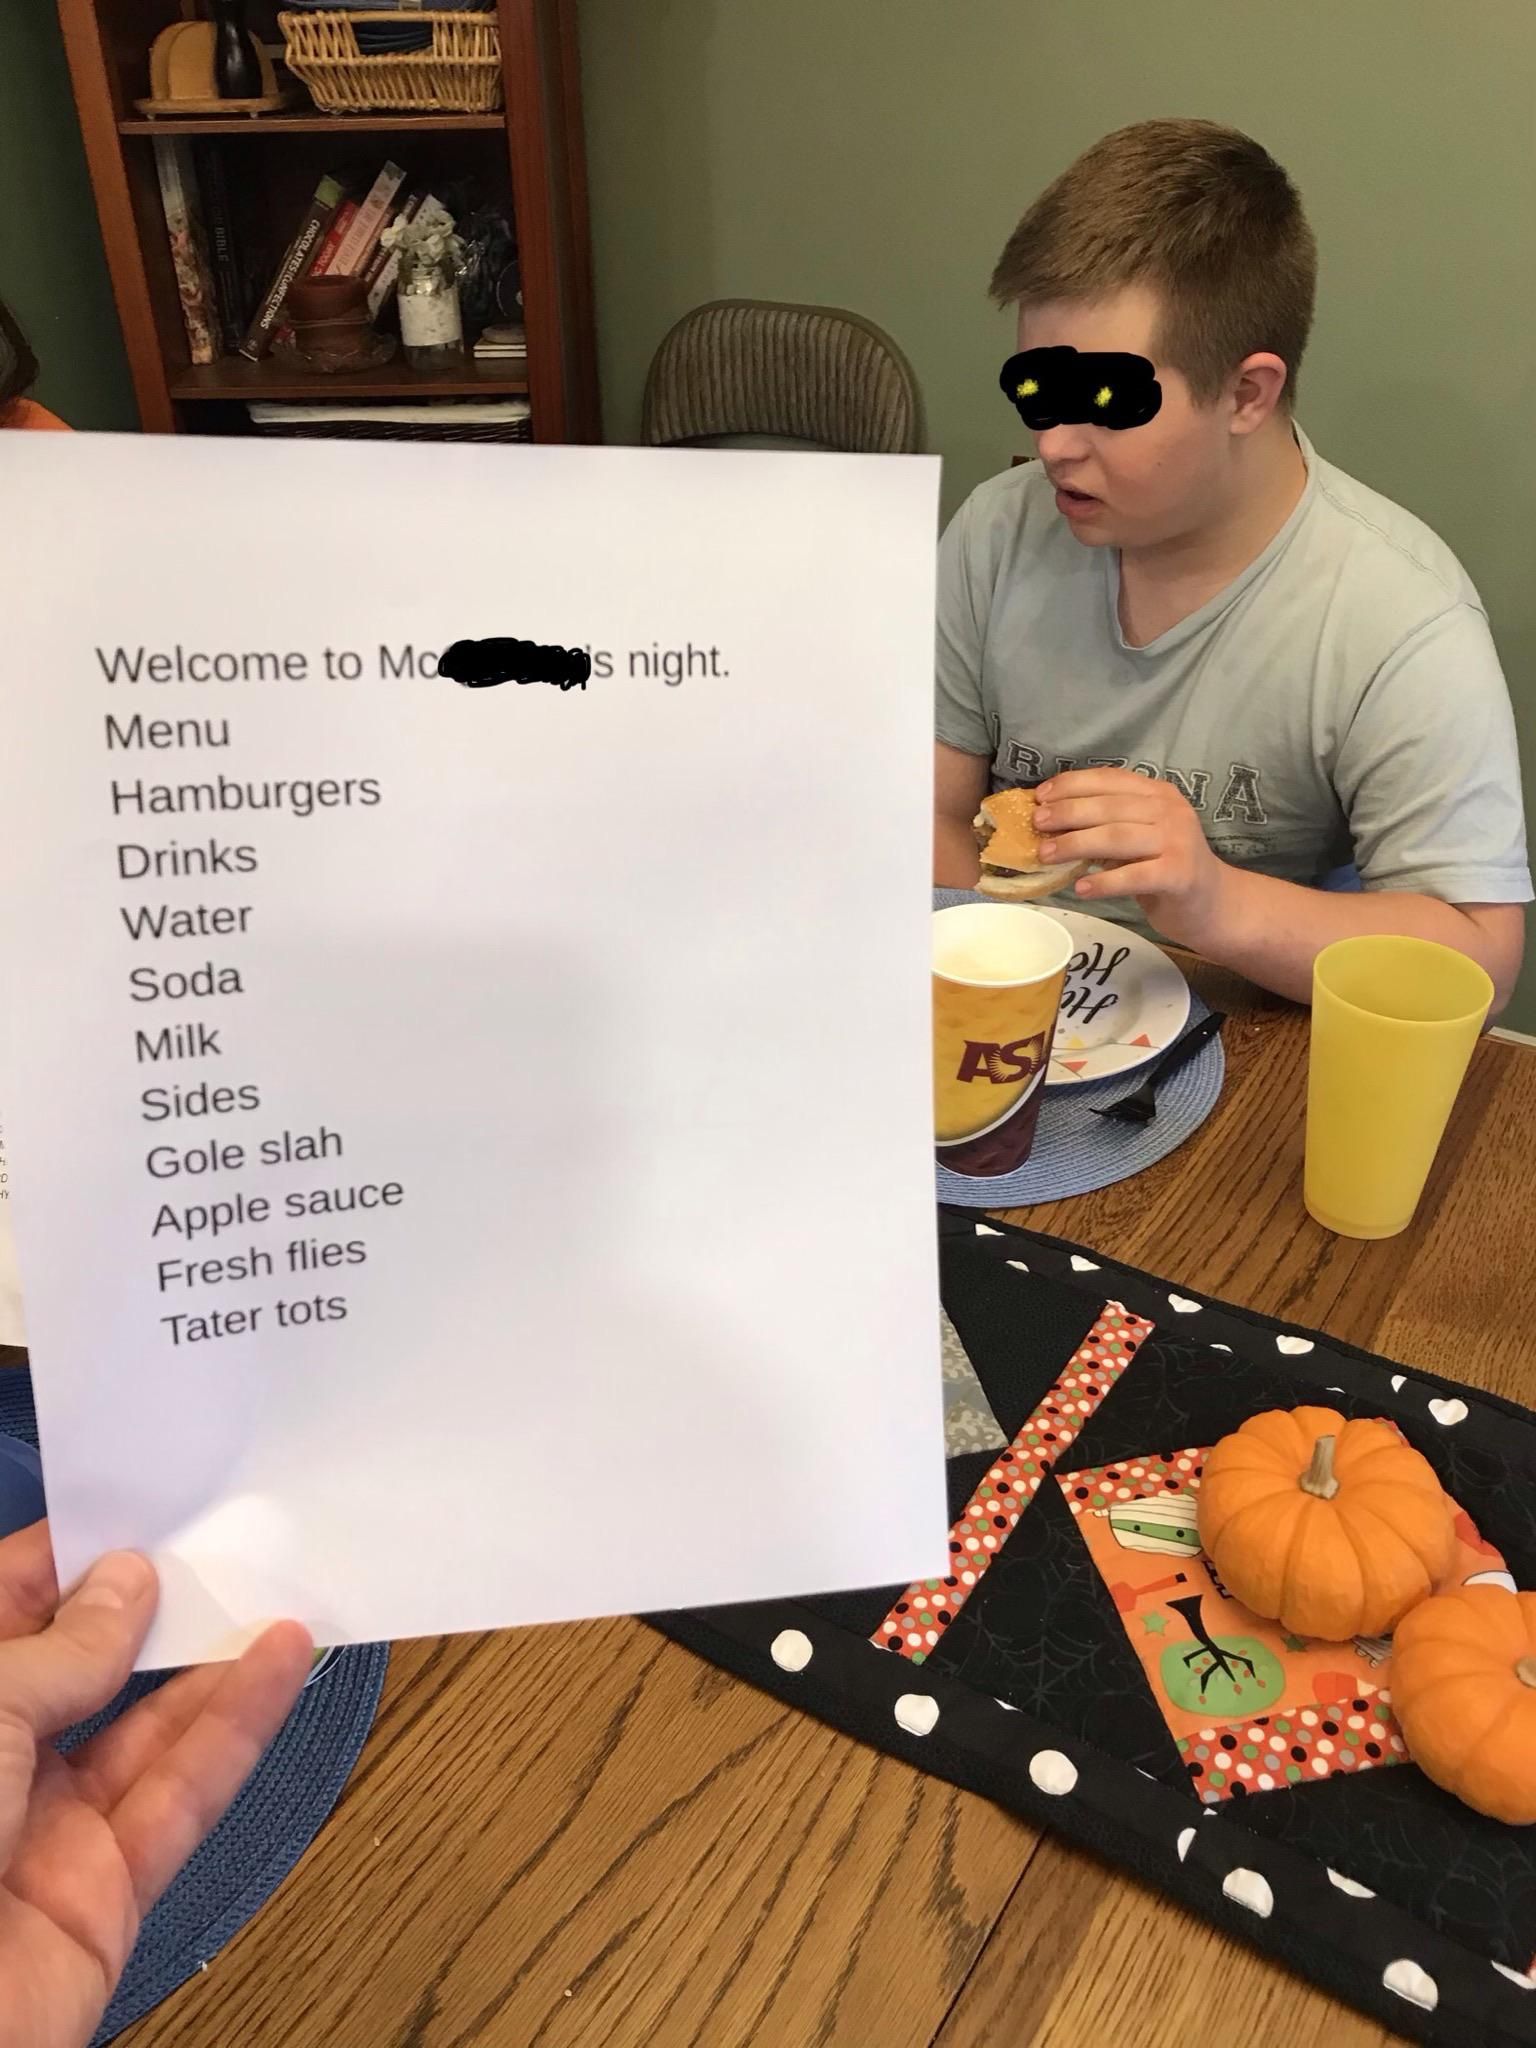 My son, who has Down syndrome, made up a menu for tonight’s dinner. He did a good job, except some of the sides are a little sketchy.